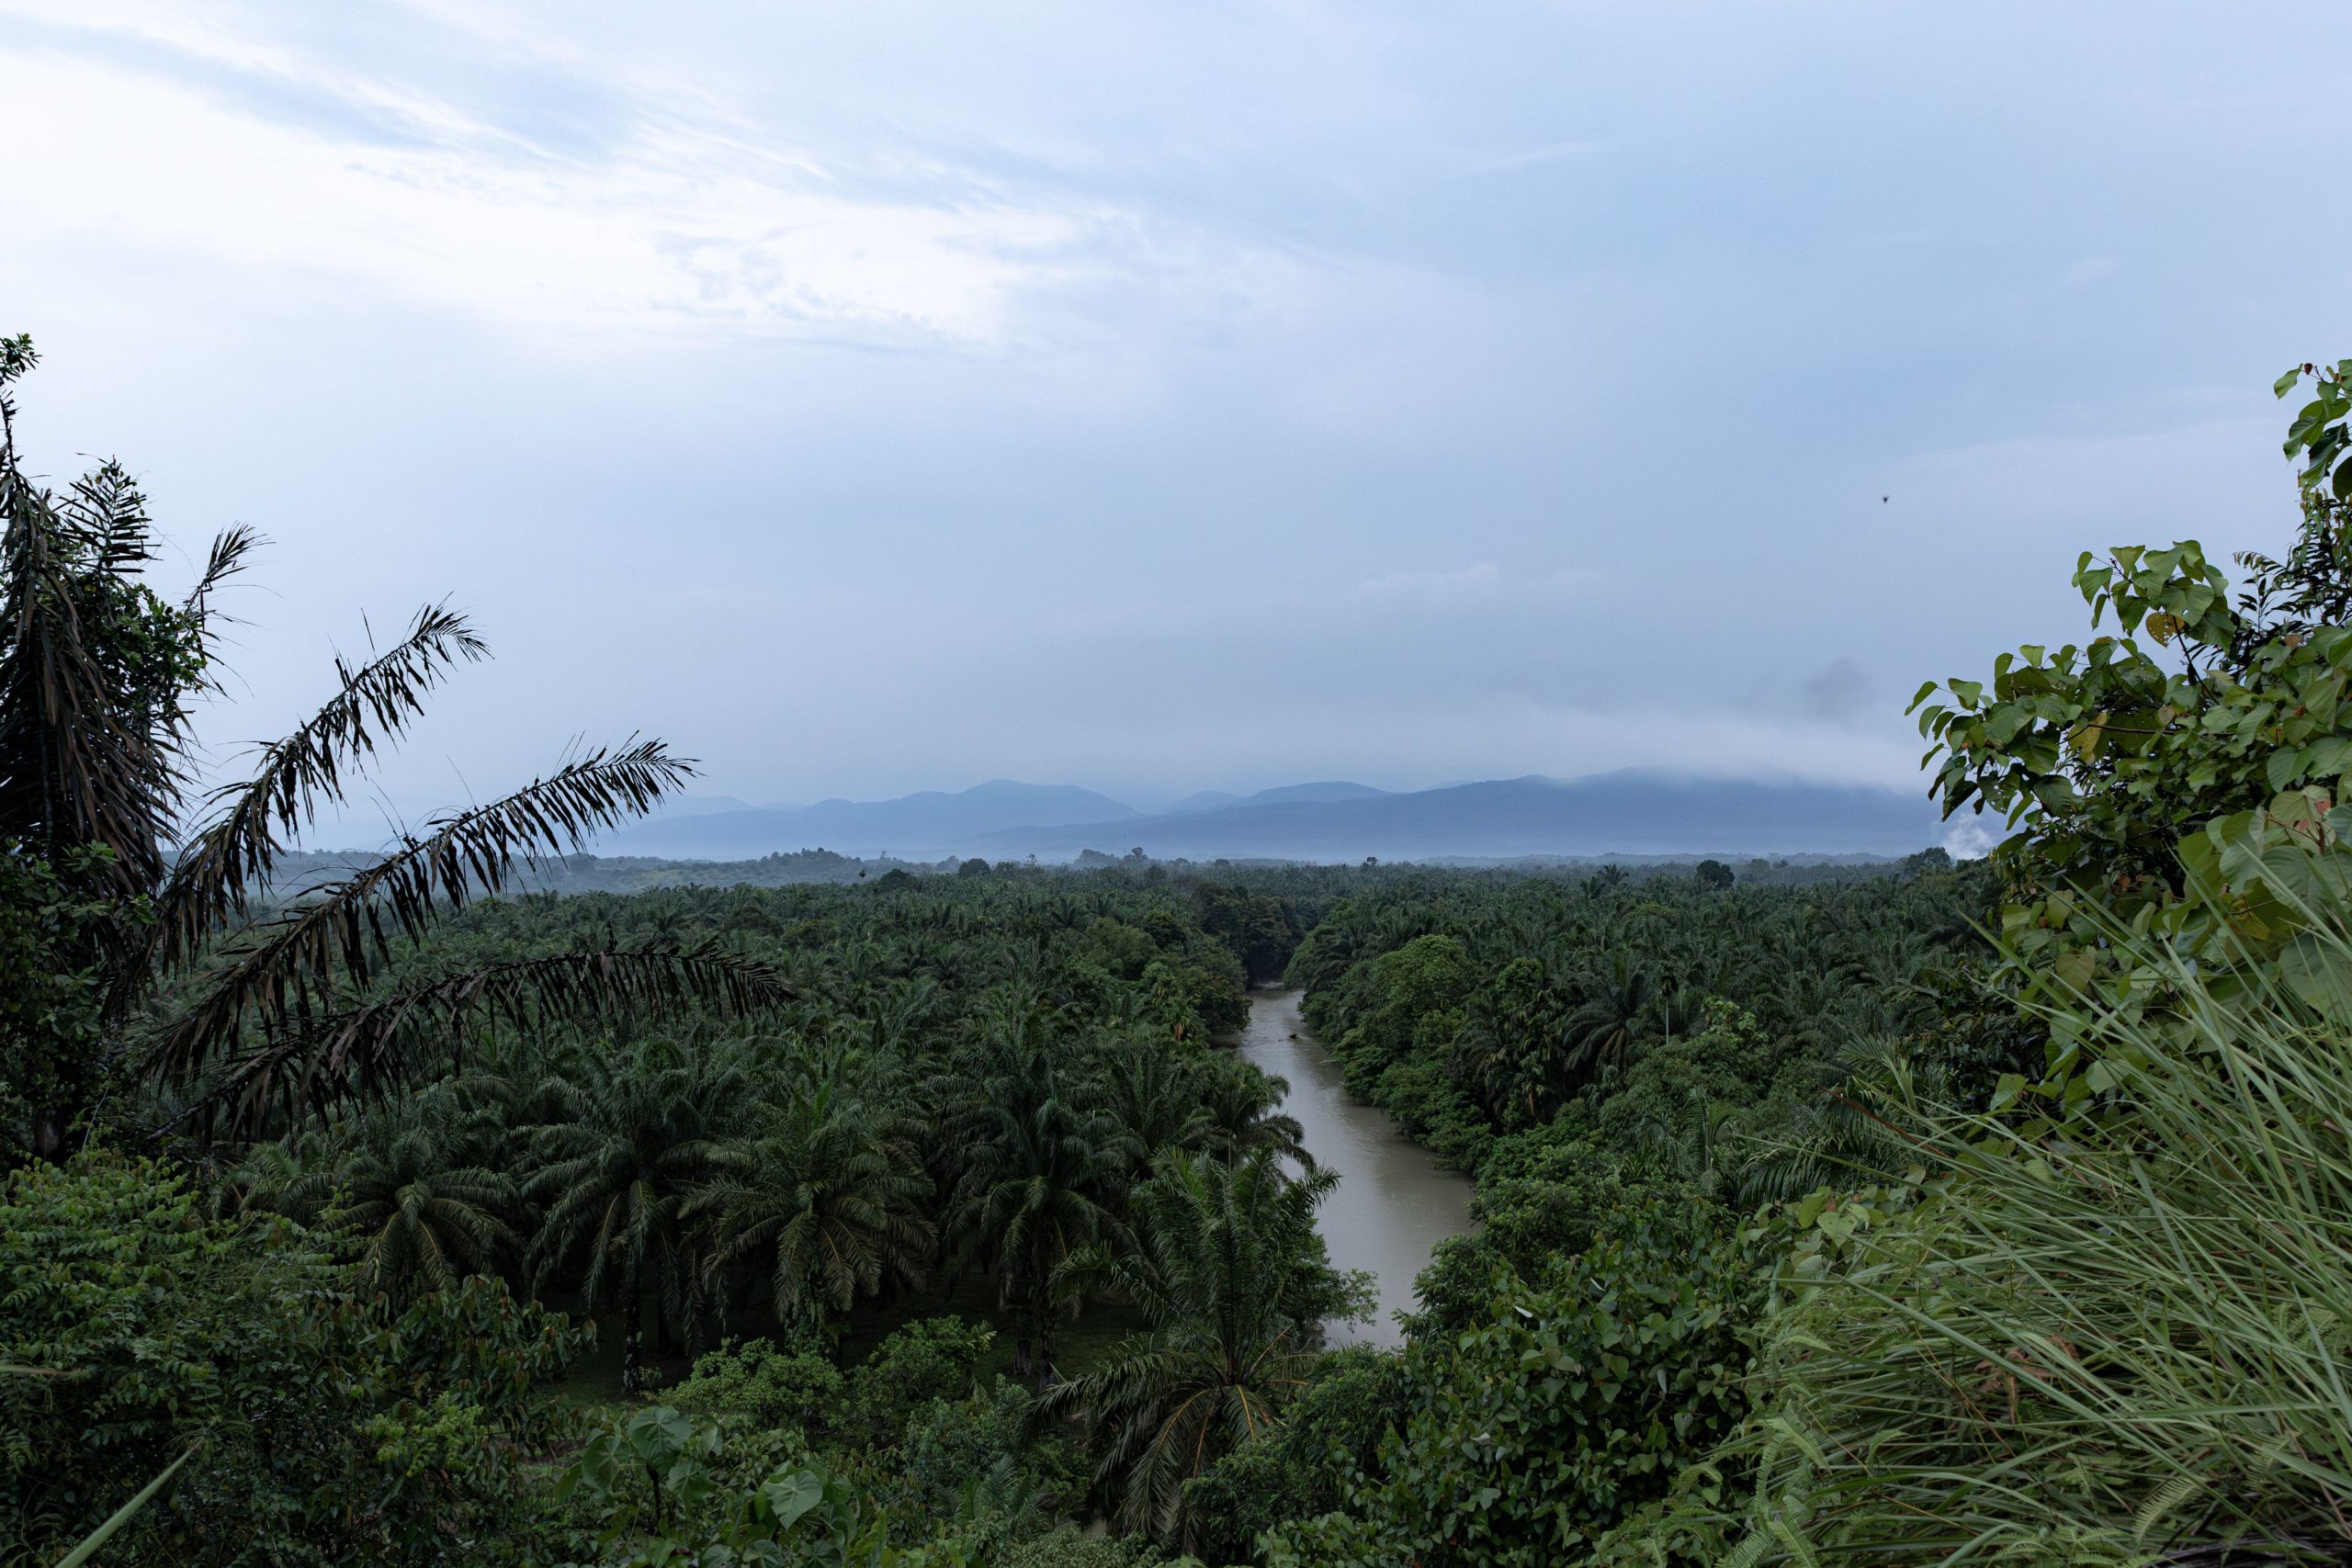 <p>An oil palm plantation in North Sumatra, Indonesia, with the Gunung Leuser National Park in the background (Image: Adithio Noviello / Alamy)</p>“></p>



<p>An oil palm plantation in North Sumatra, Indonesia, with the Gunung Leuser National Park in the background (Image: Adithio Noviello / Alamy)<a href=